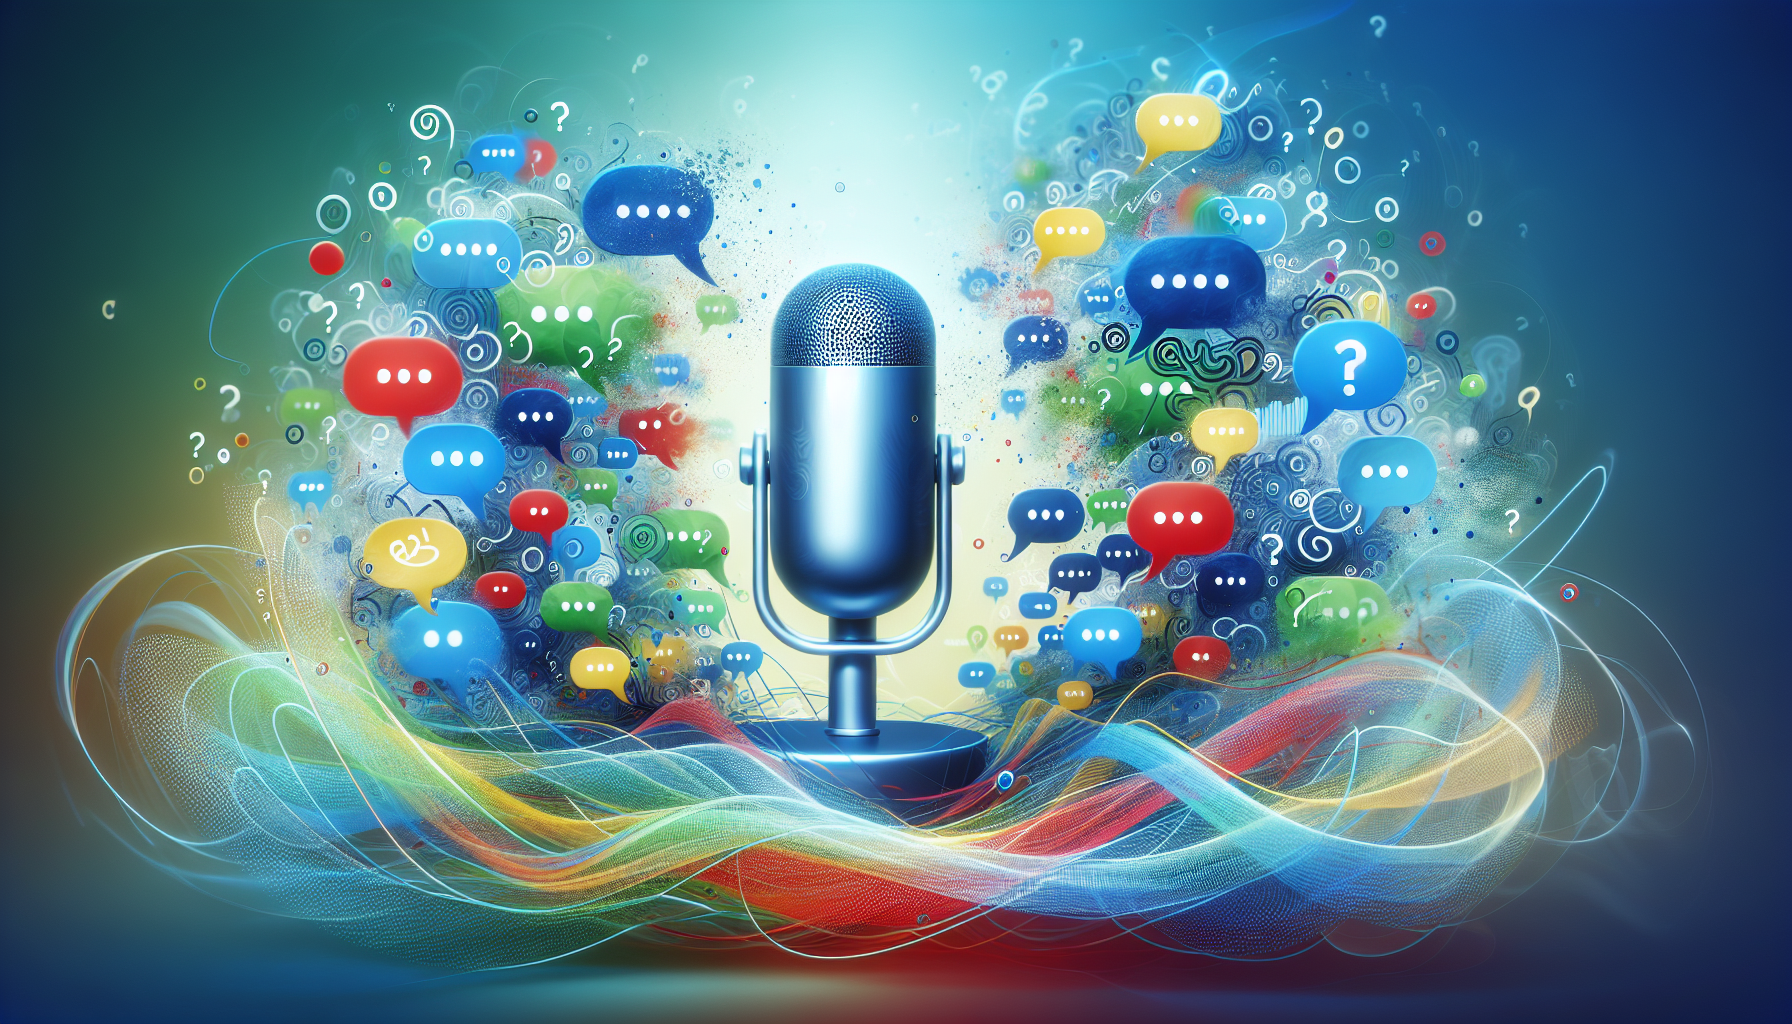 Illustration of voice search technology